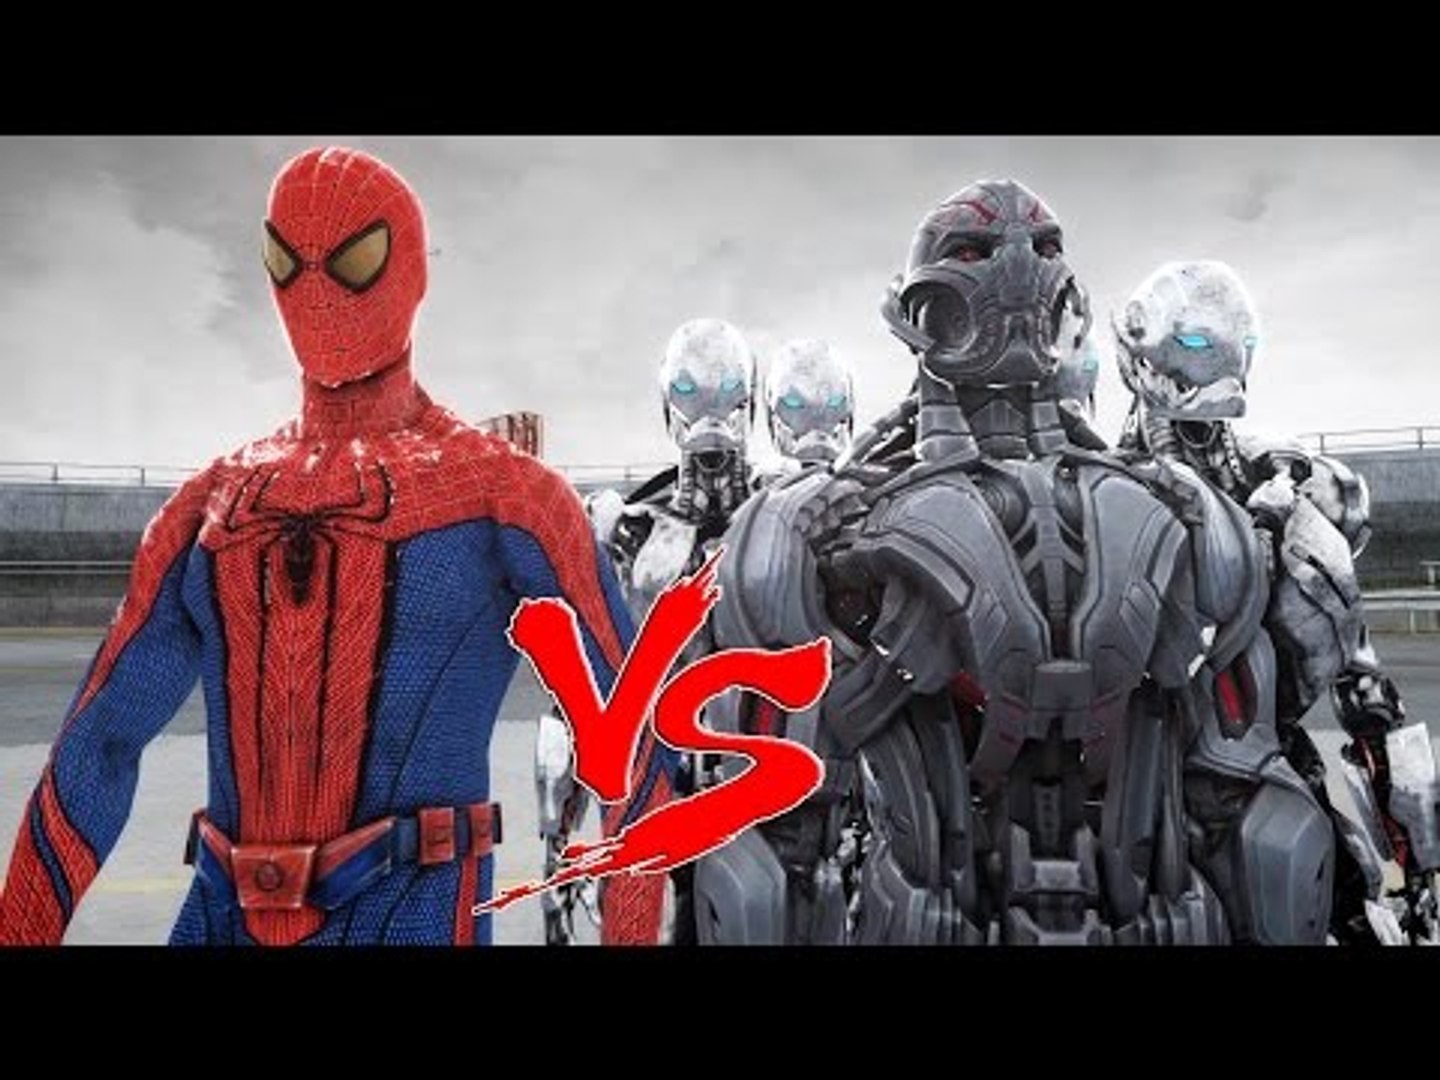 THE AMAZING SPIDER-MAN VS ULTRON ARMY - EPIC BATTLE - video Dailymotion